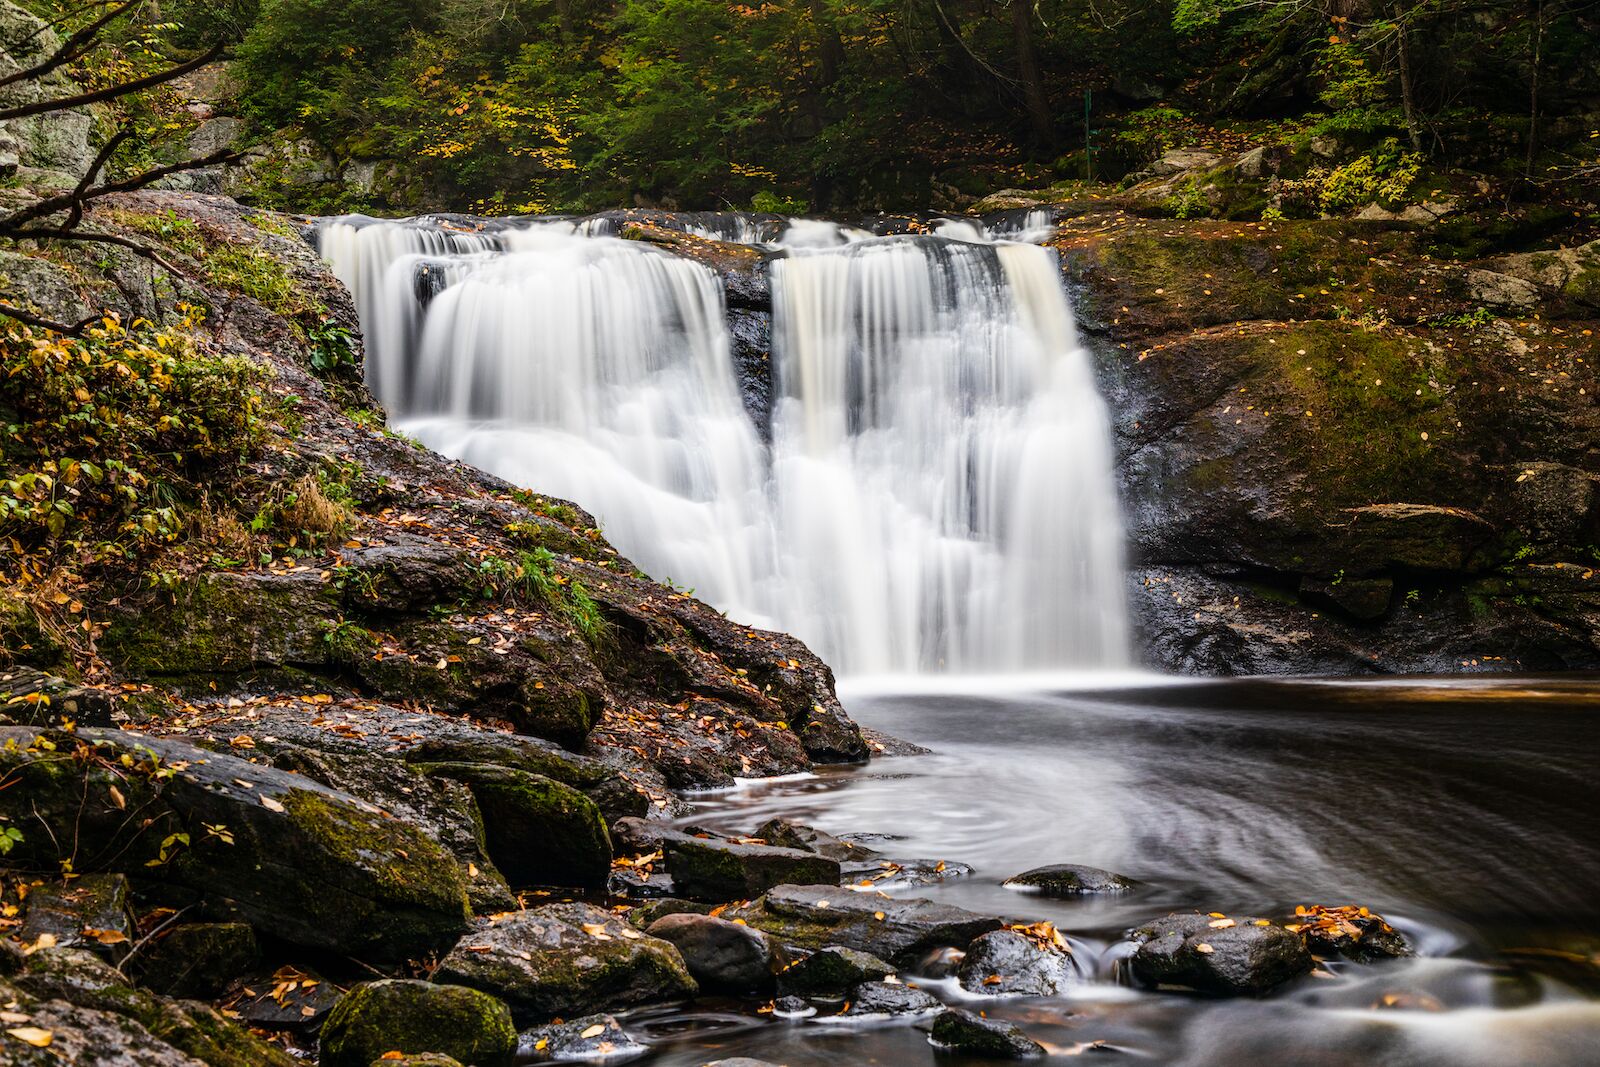 Capturing the series of cascades of the Doane's Falls in Royalston, MA. Taken in the fall.